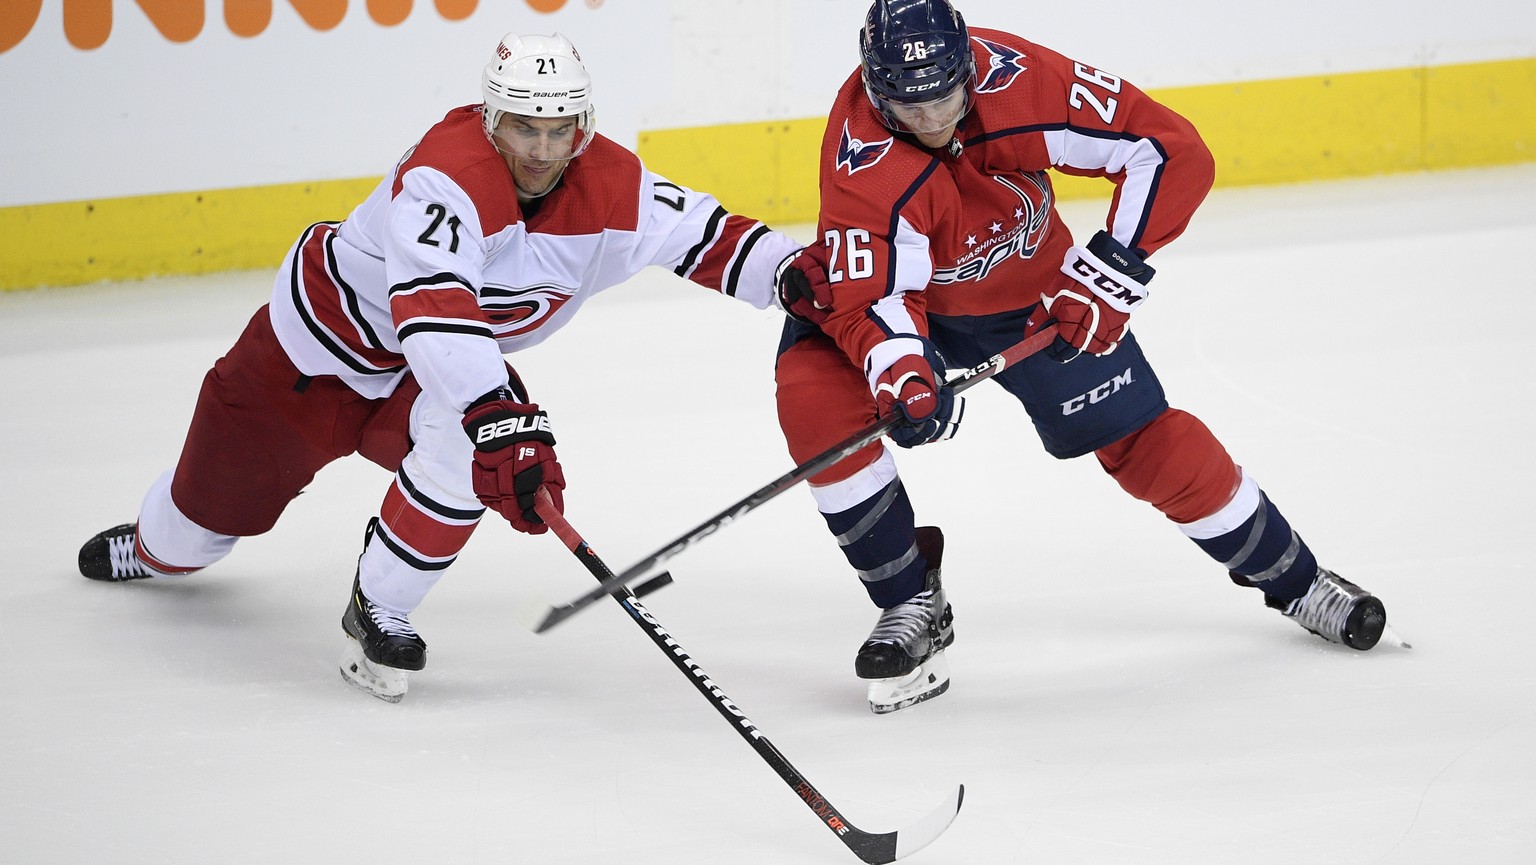 Carolina Hurricanes right wing Nino Niederreiter (21) works for the puck against Washington Capitals center Nic Dowd (26) during the third period of Game 1 of an NHL hockey first-round playoff series  ...